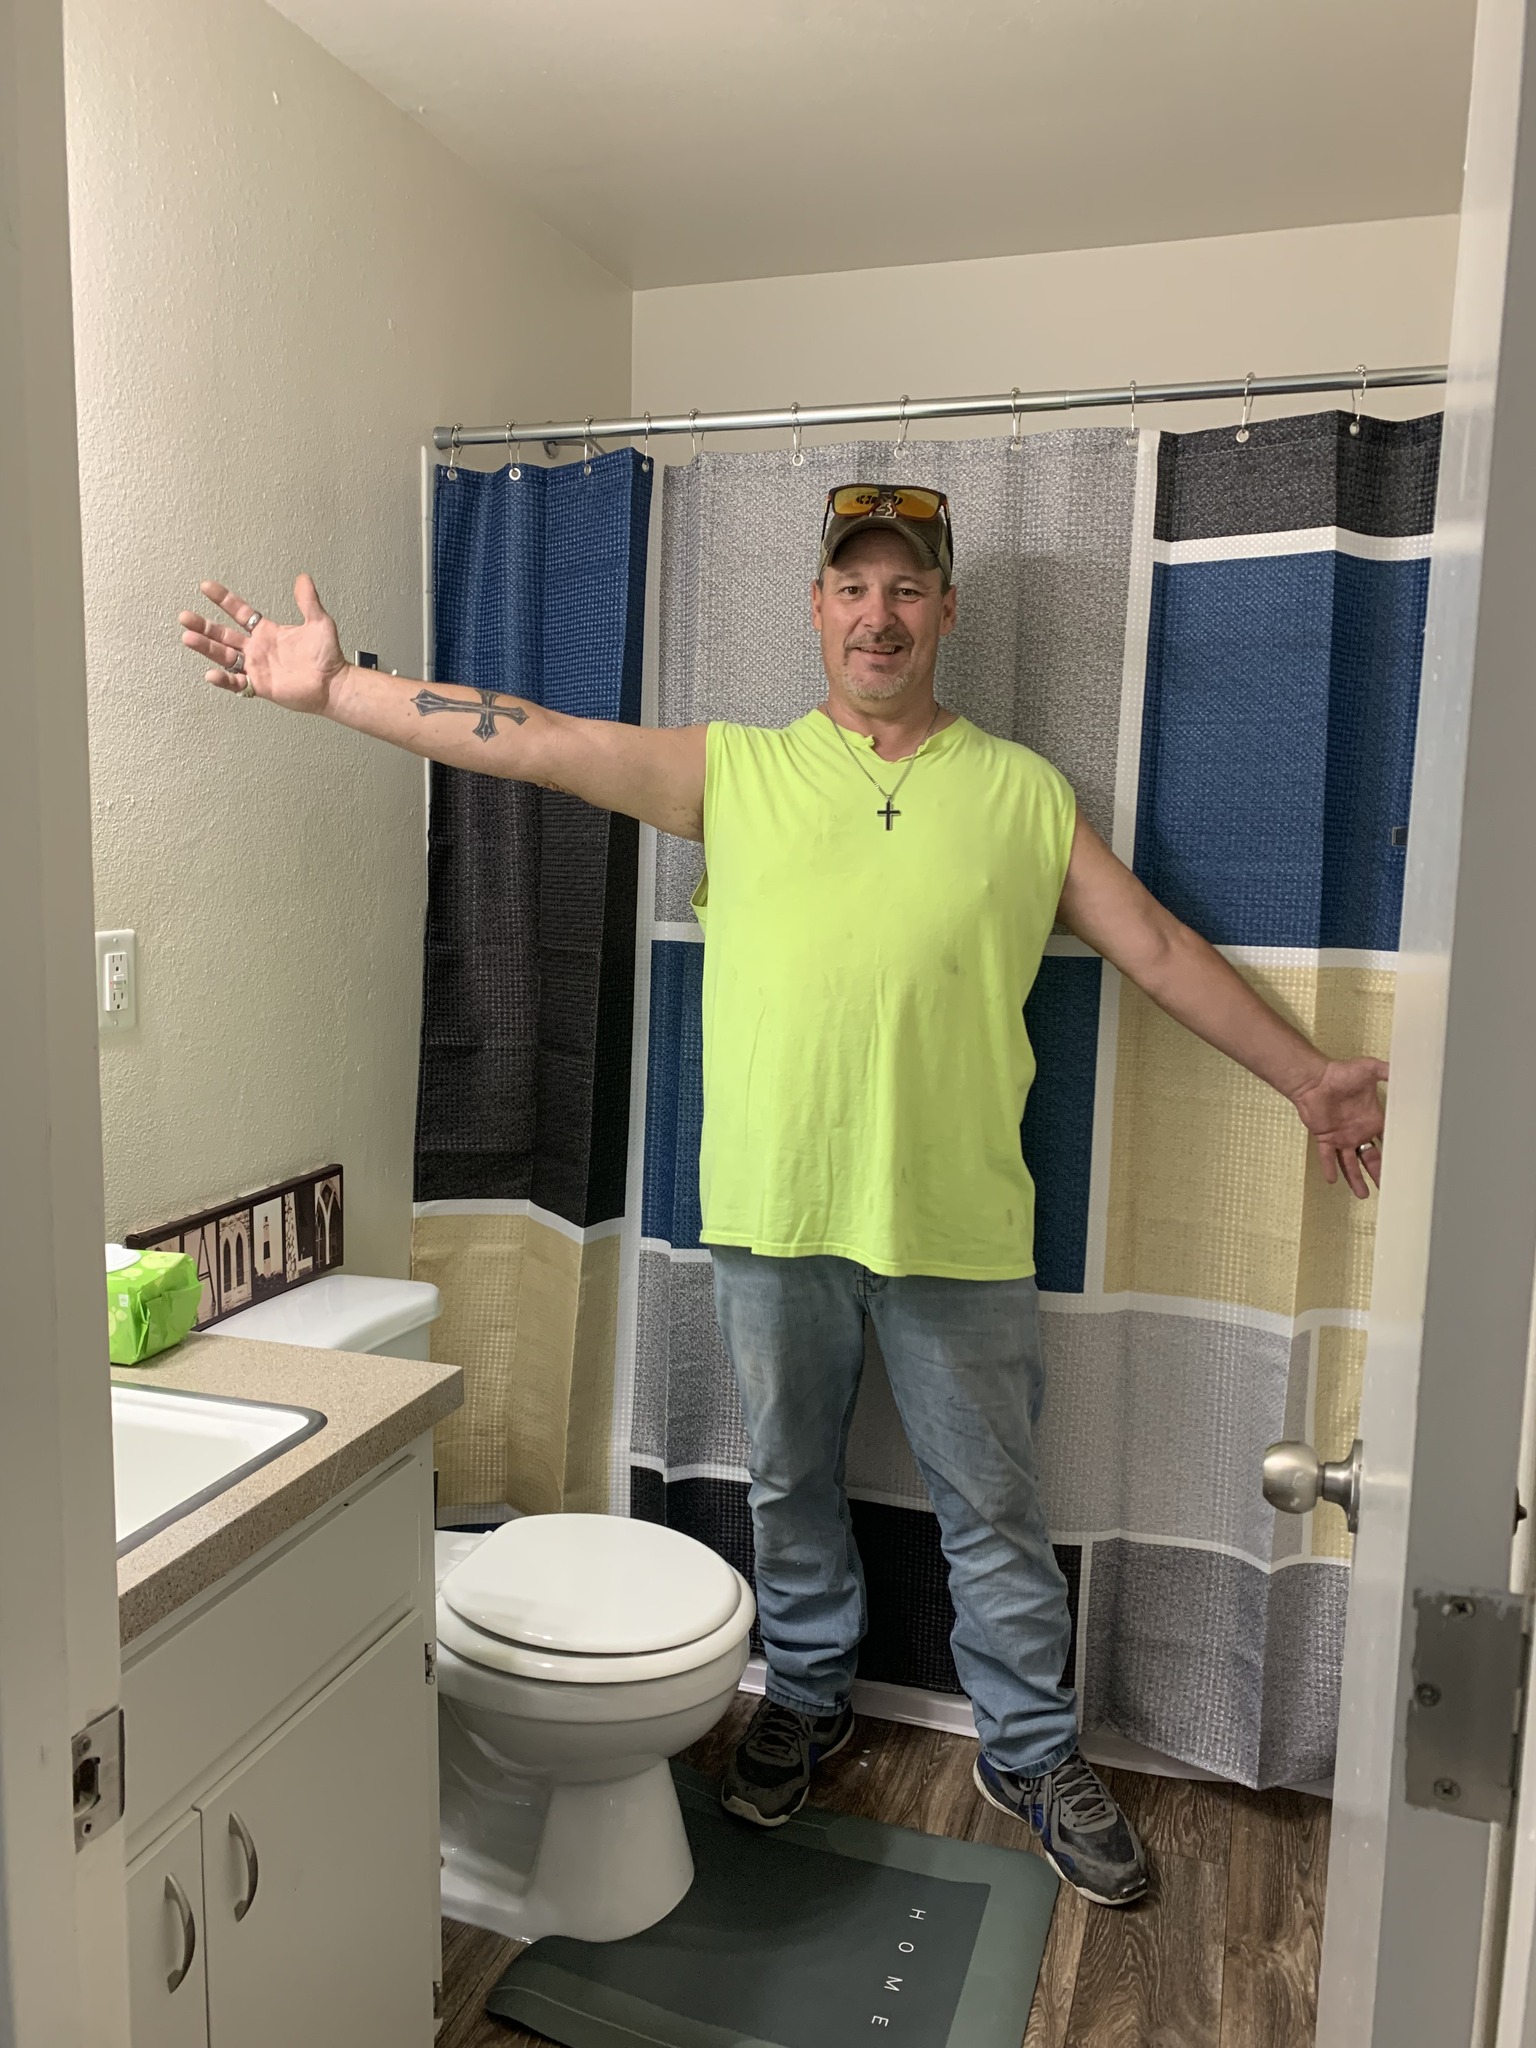 A man standing in a bathroom with his arms outstretched, wearing a yellow shirt.